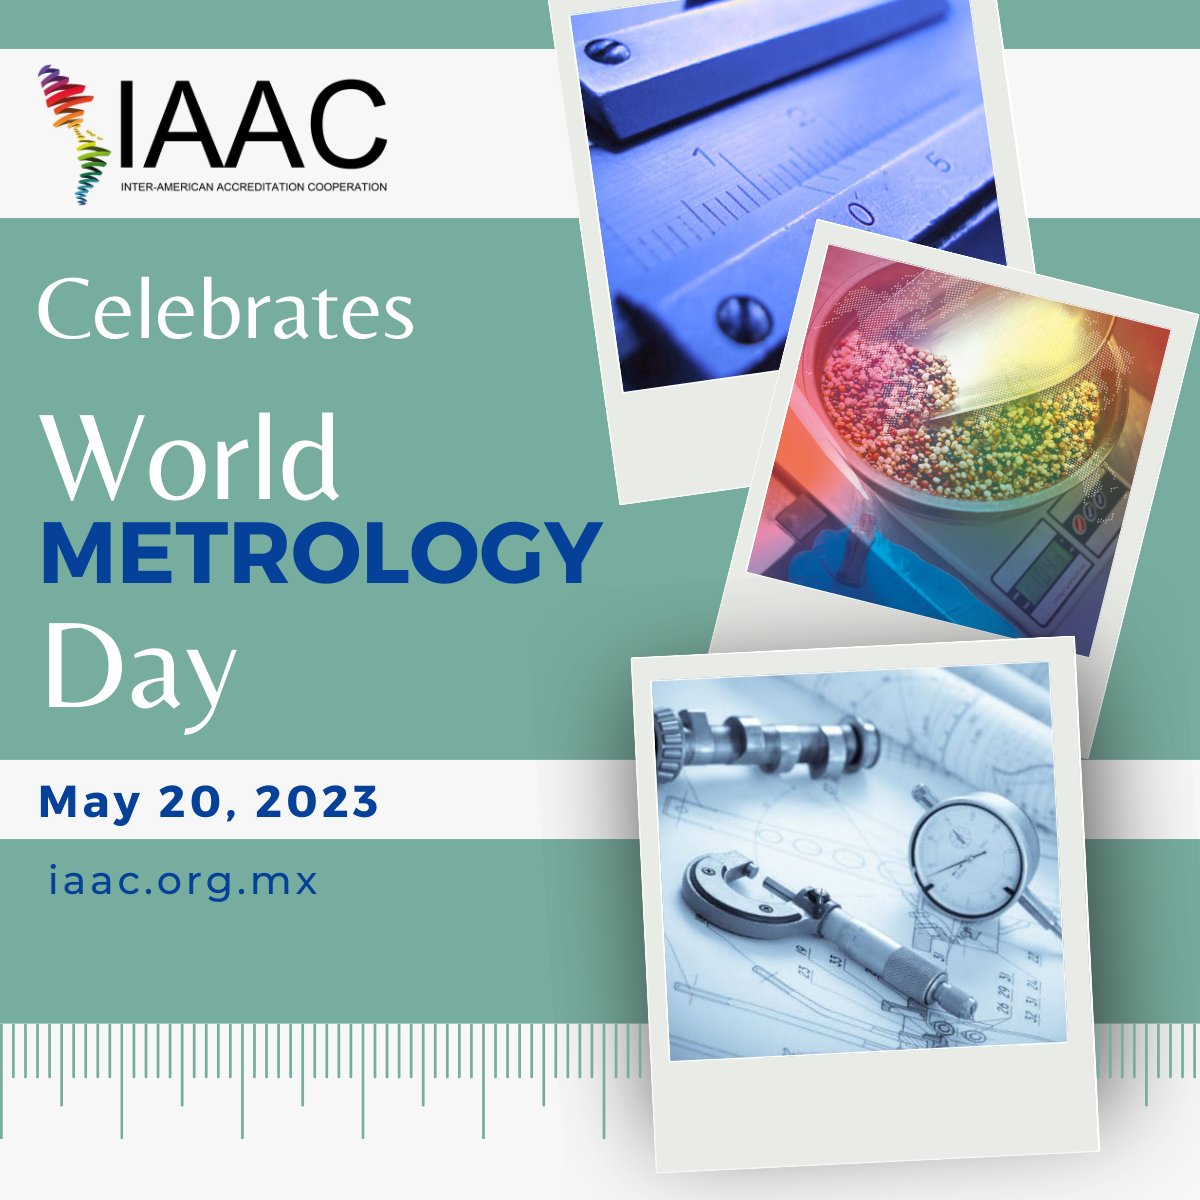 IAAC celebrates #WorldMetrologyDay. Accurate measurements are essential in our daily lives. Measurements are crucial in science, industry, trade, health, and the environment.  Accredited Laboratories offer confidence through the traceability of their results. #Accreditation